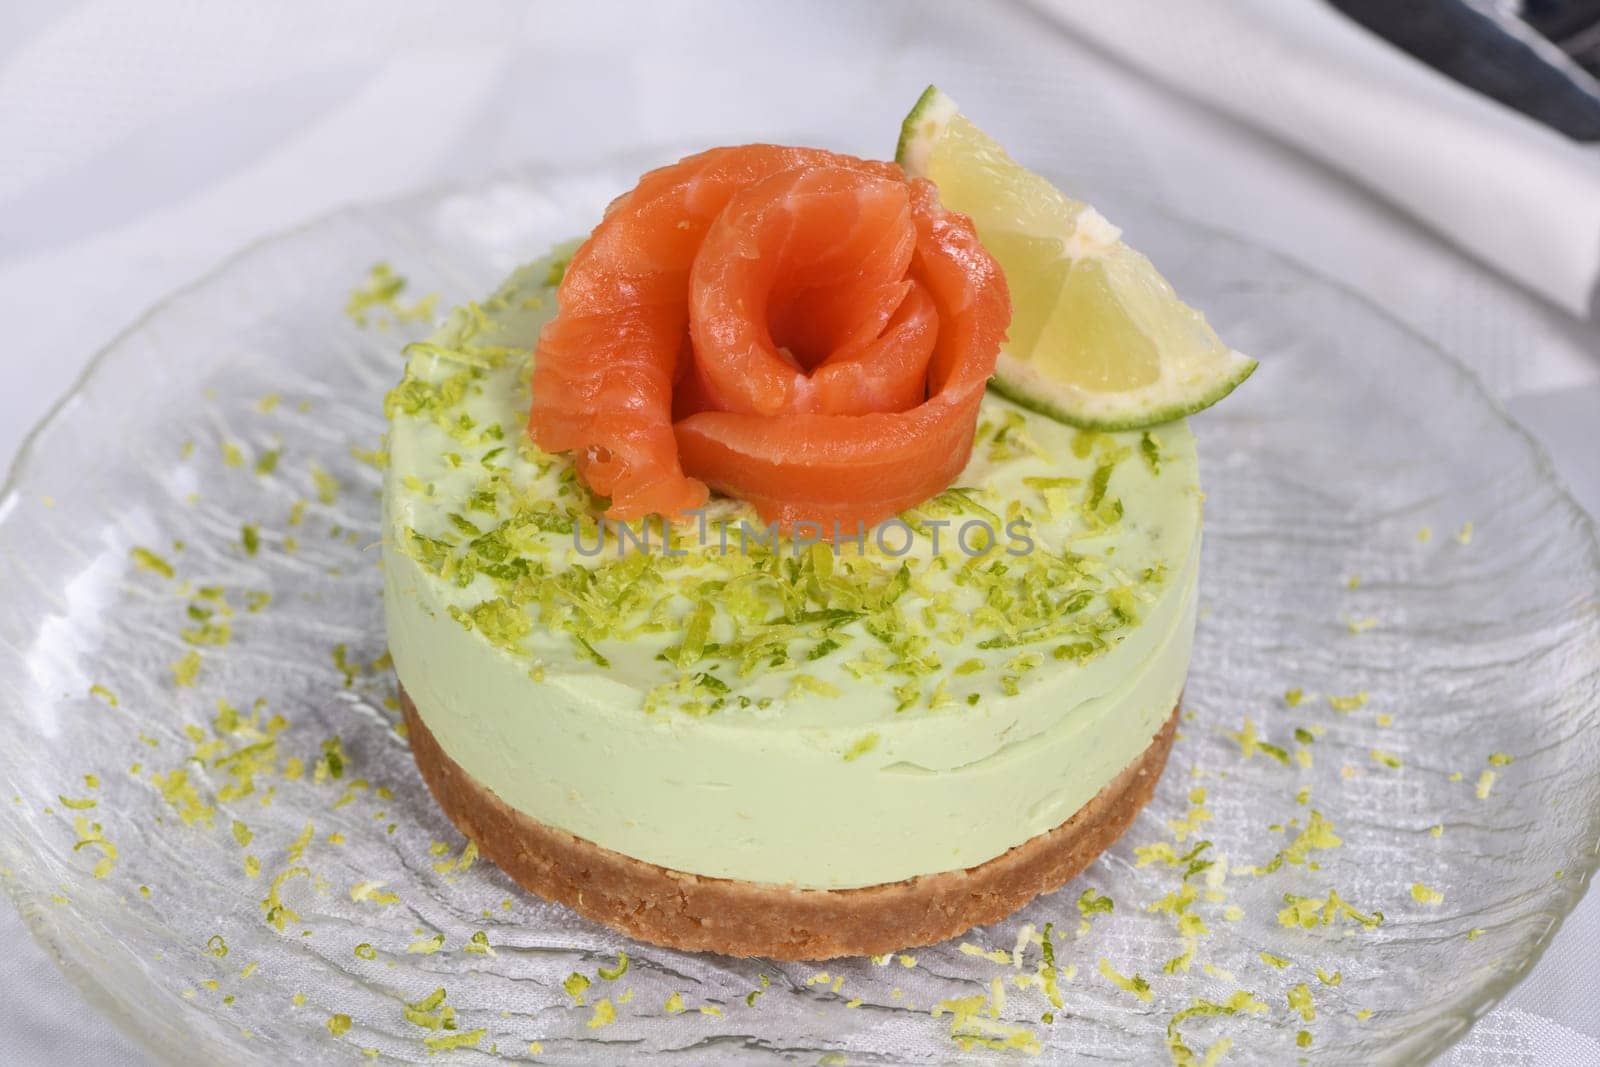 Avocado timbale with salmon by Apolonia